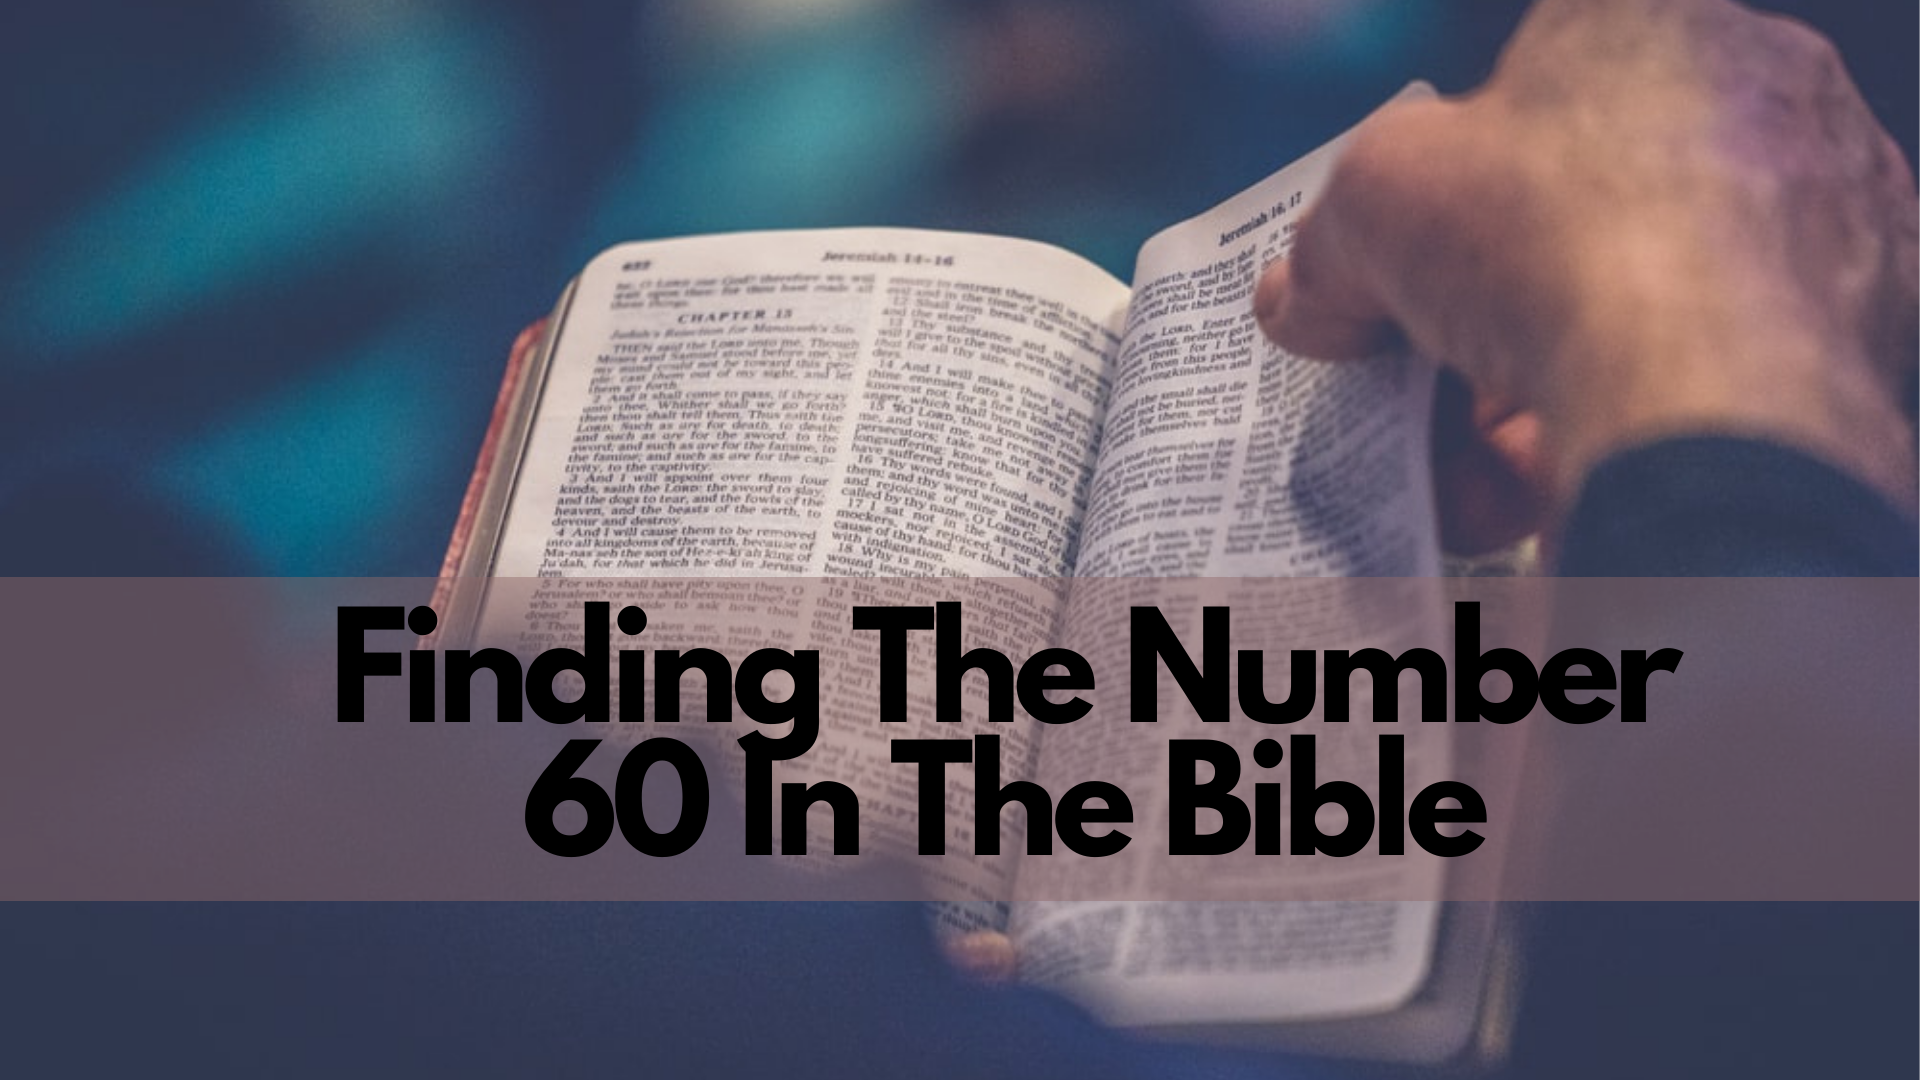 A person holding and reading a Bible with words Finding The Number 60 In The Bible